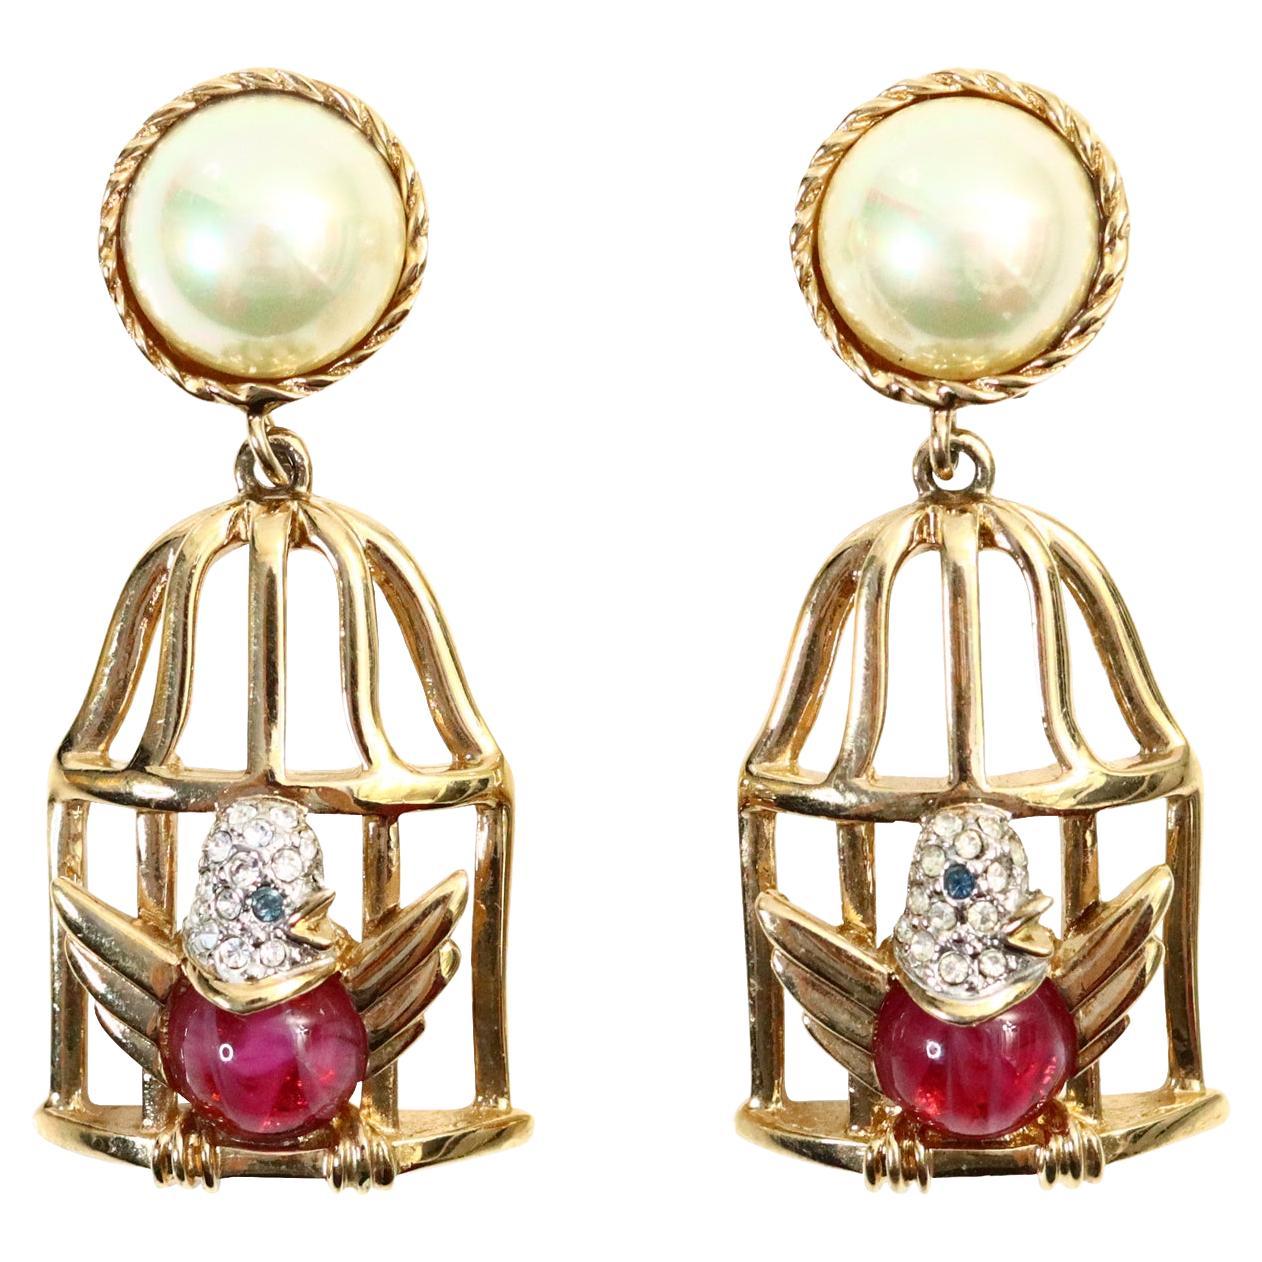 Vintage Carolee Gold and Faux Pearl Dangling Birdcage Earrings, Circa 1980s